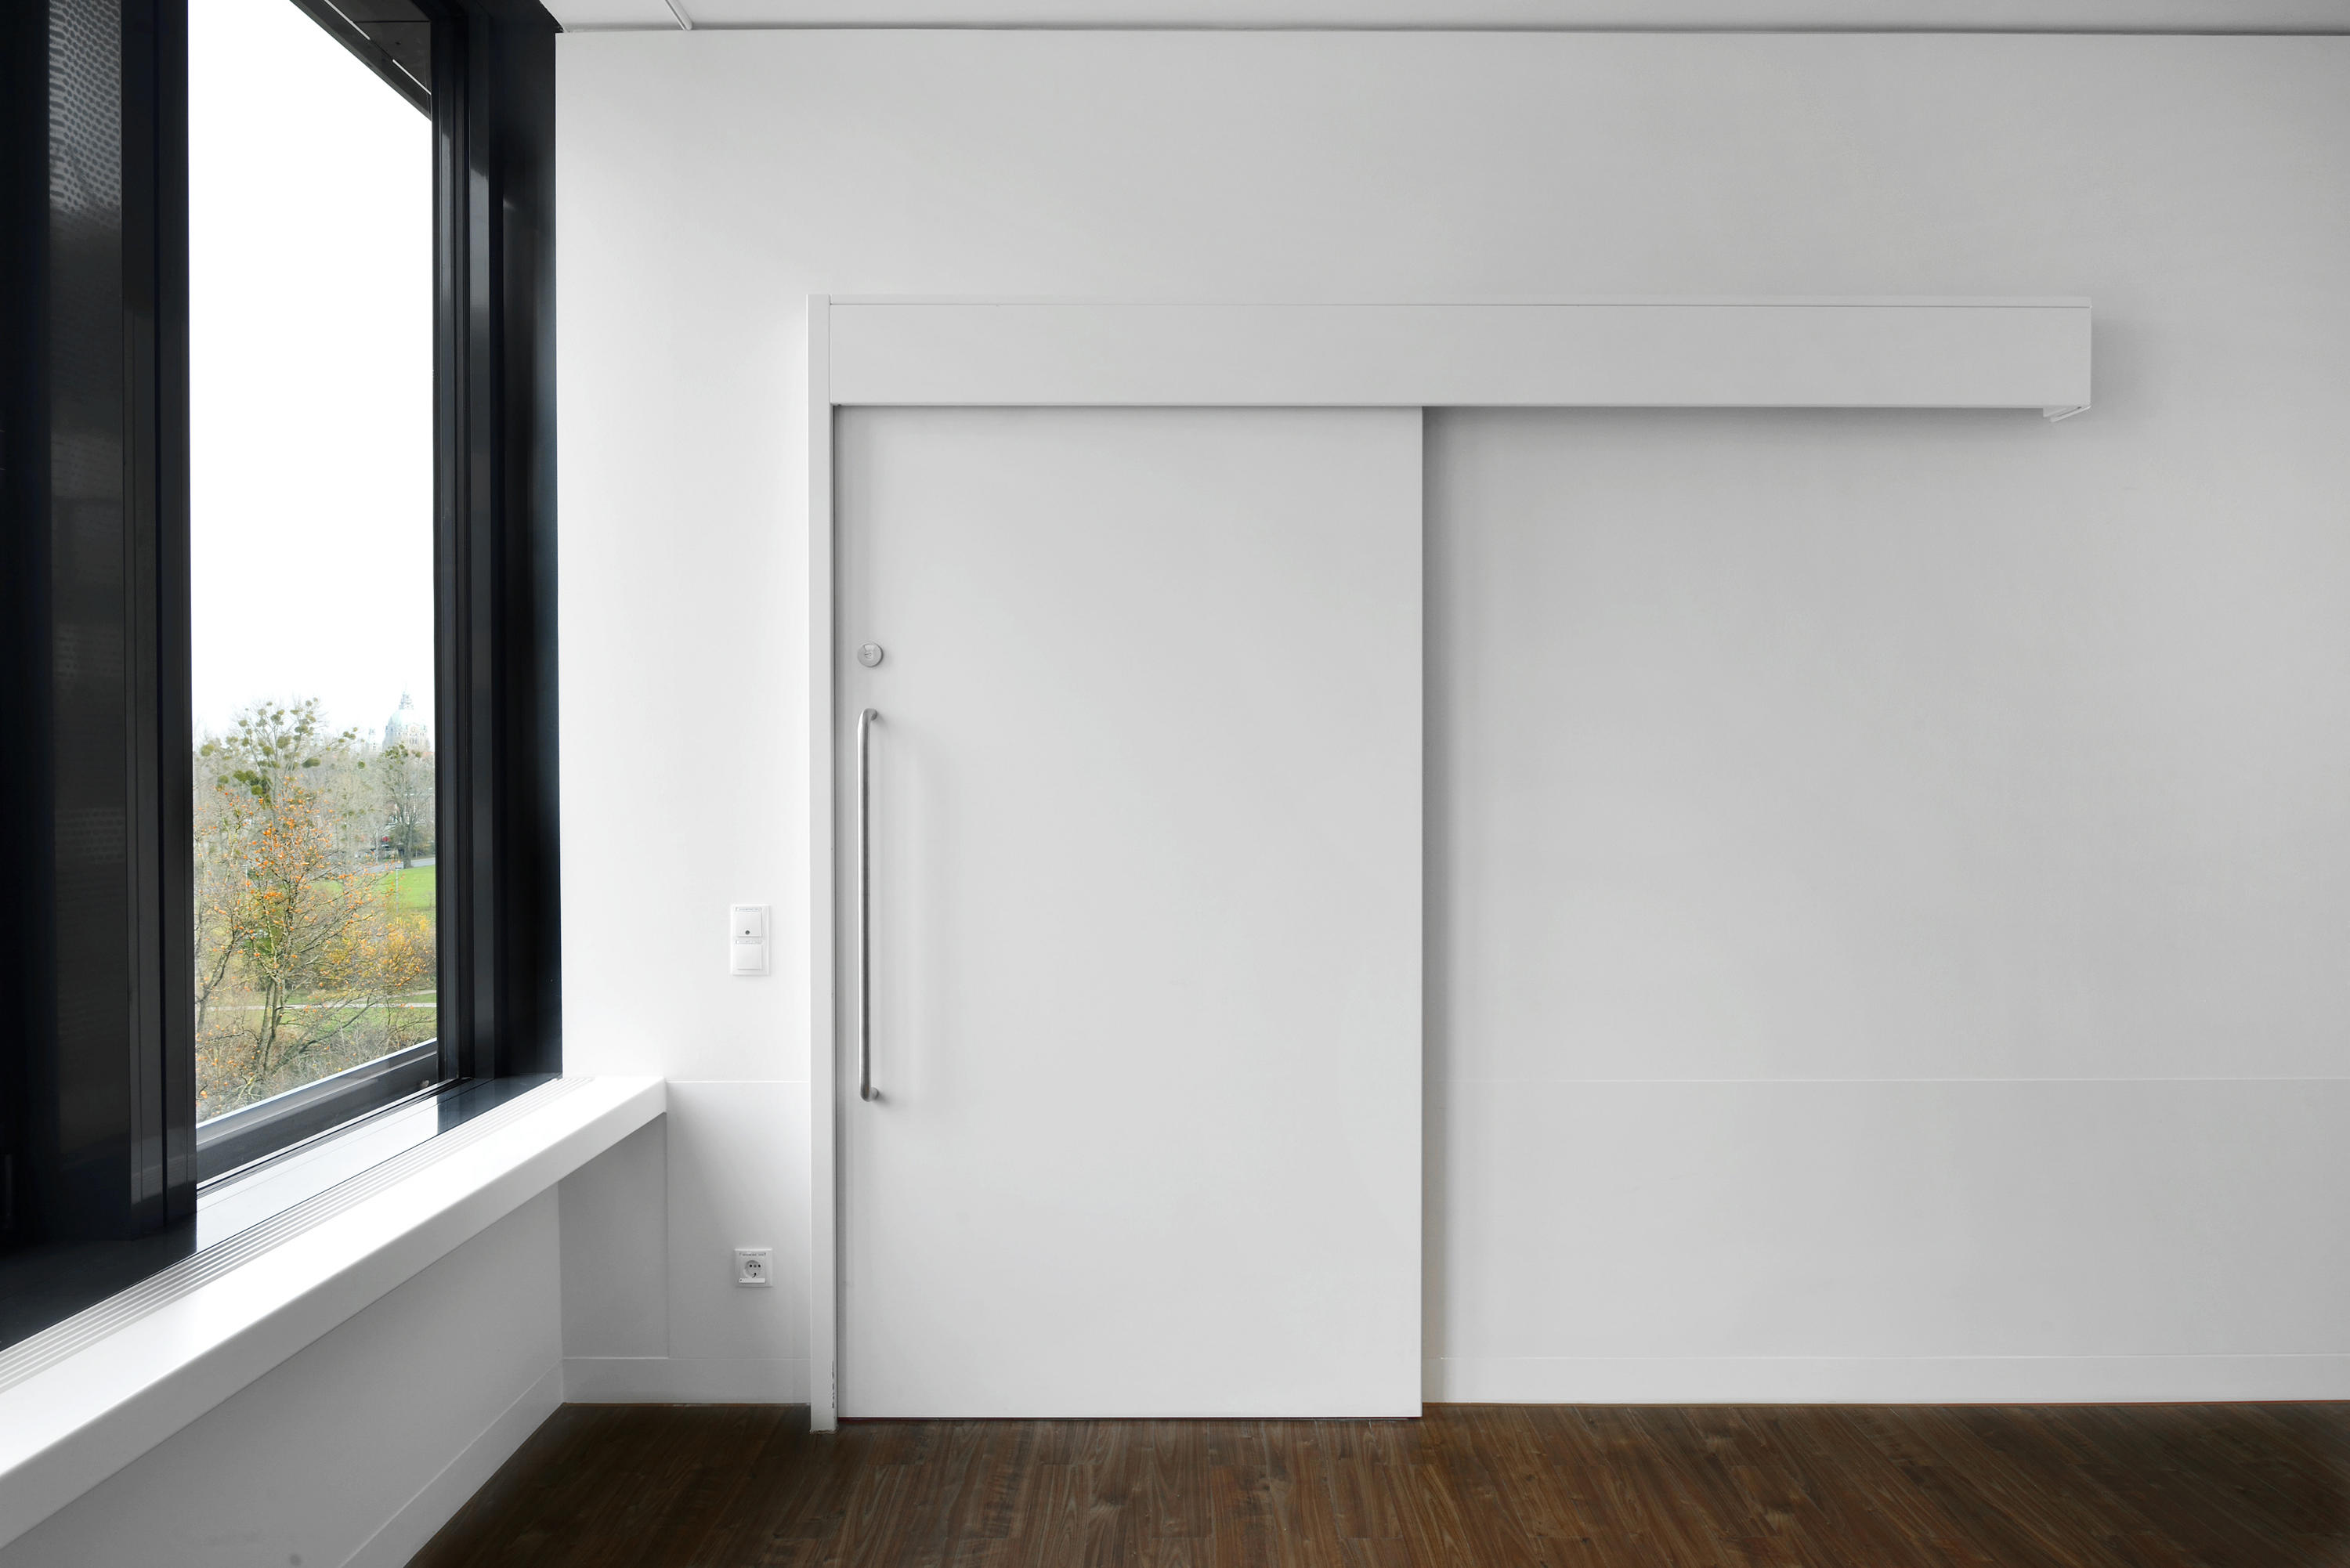 T0 1 Type S Internal Doors From Lindner Group Architonic